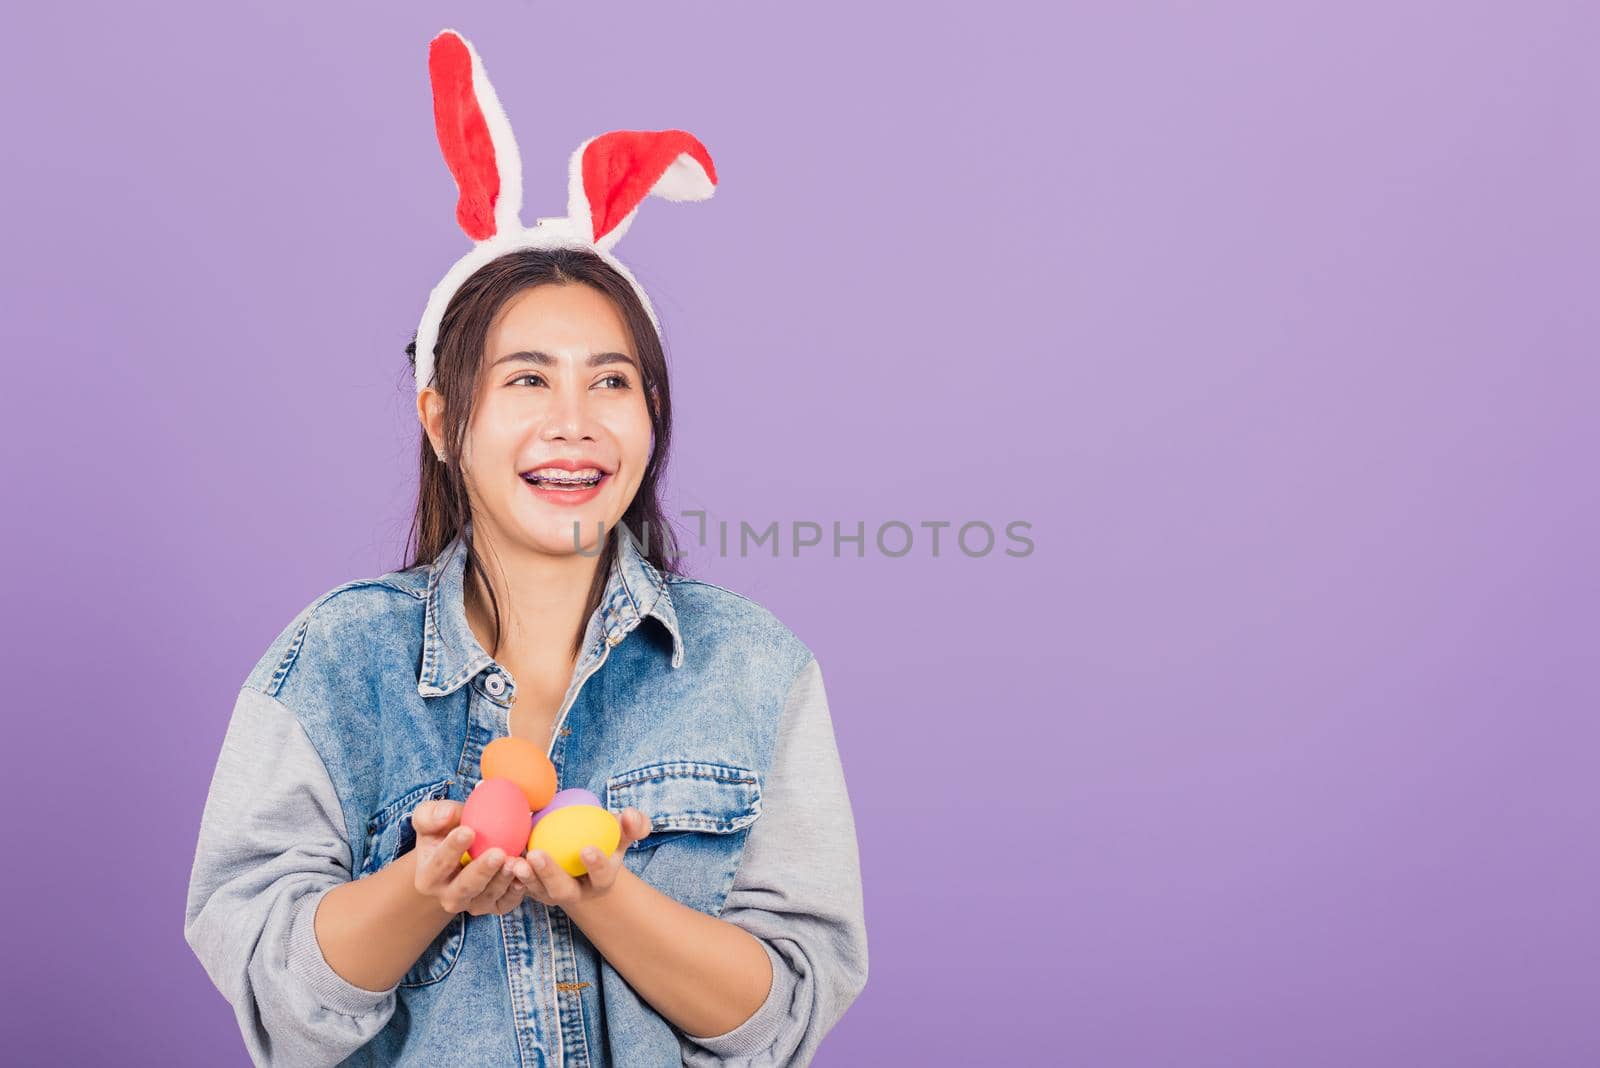 woman smiling wearing rabbit ears and denims hold colorful Easter eggs gift on hands by Sorapop